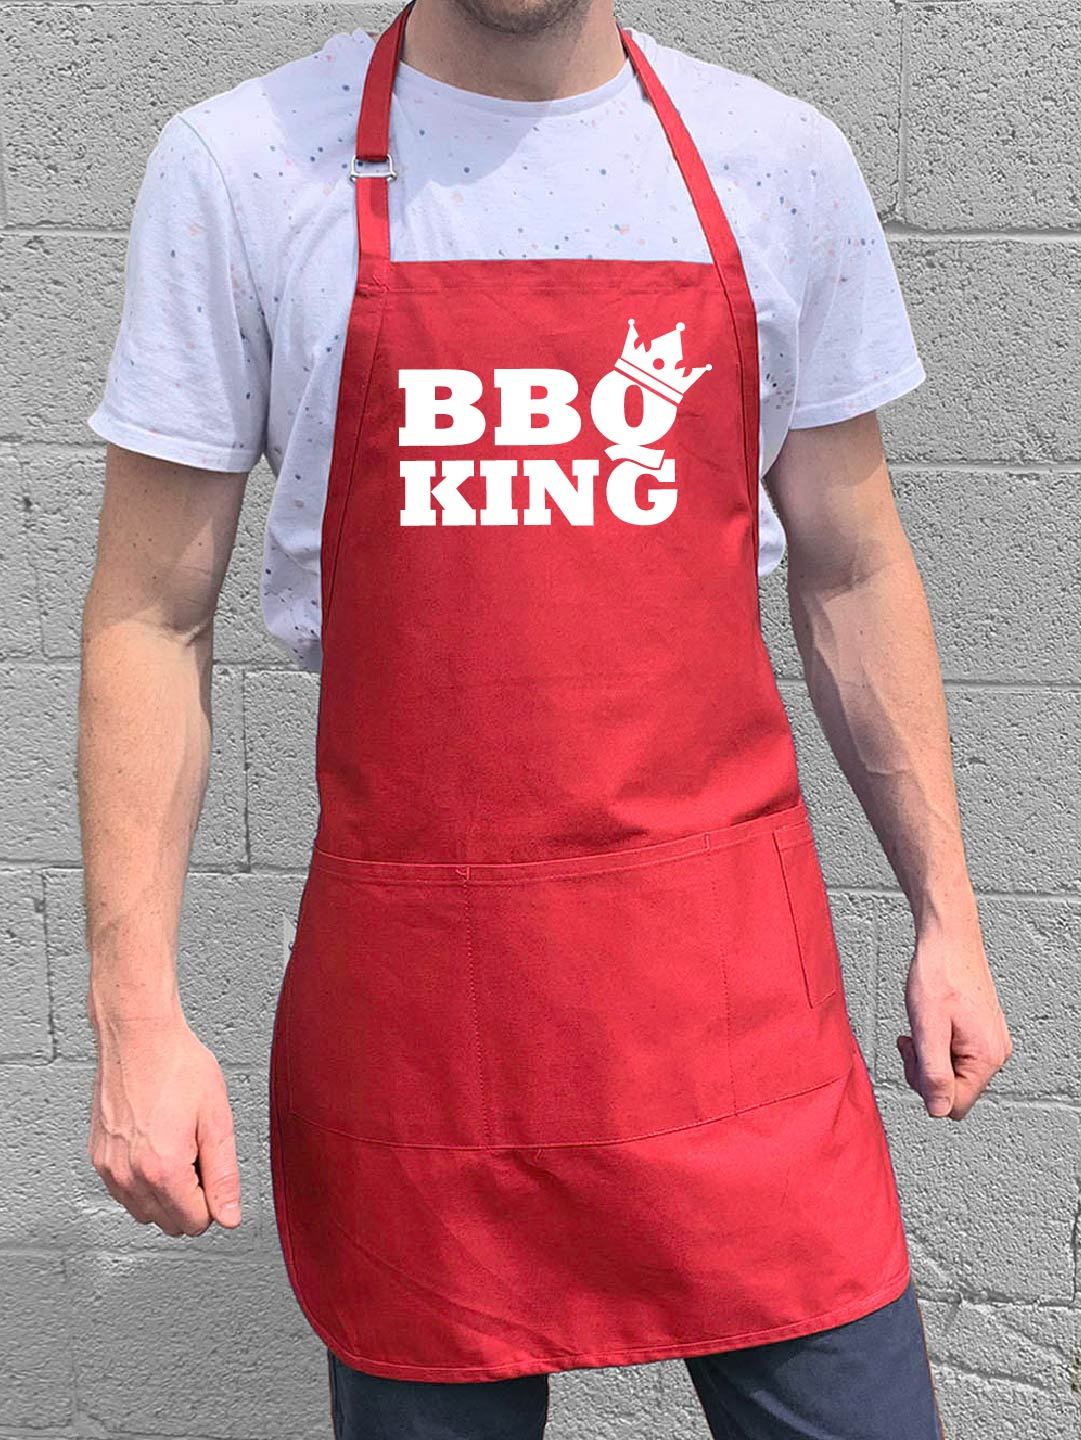 ApronMen, Stand Back Dad Is Cooking, Professionally Printed Funny BBQ Grill  Apron for Men - Adjustable One Size Fits All